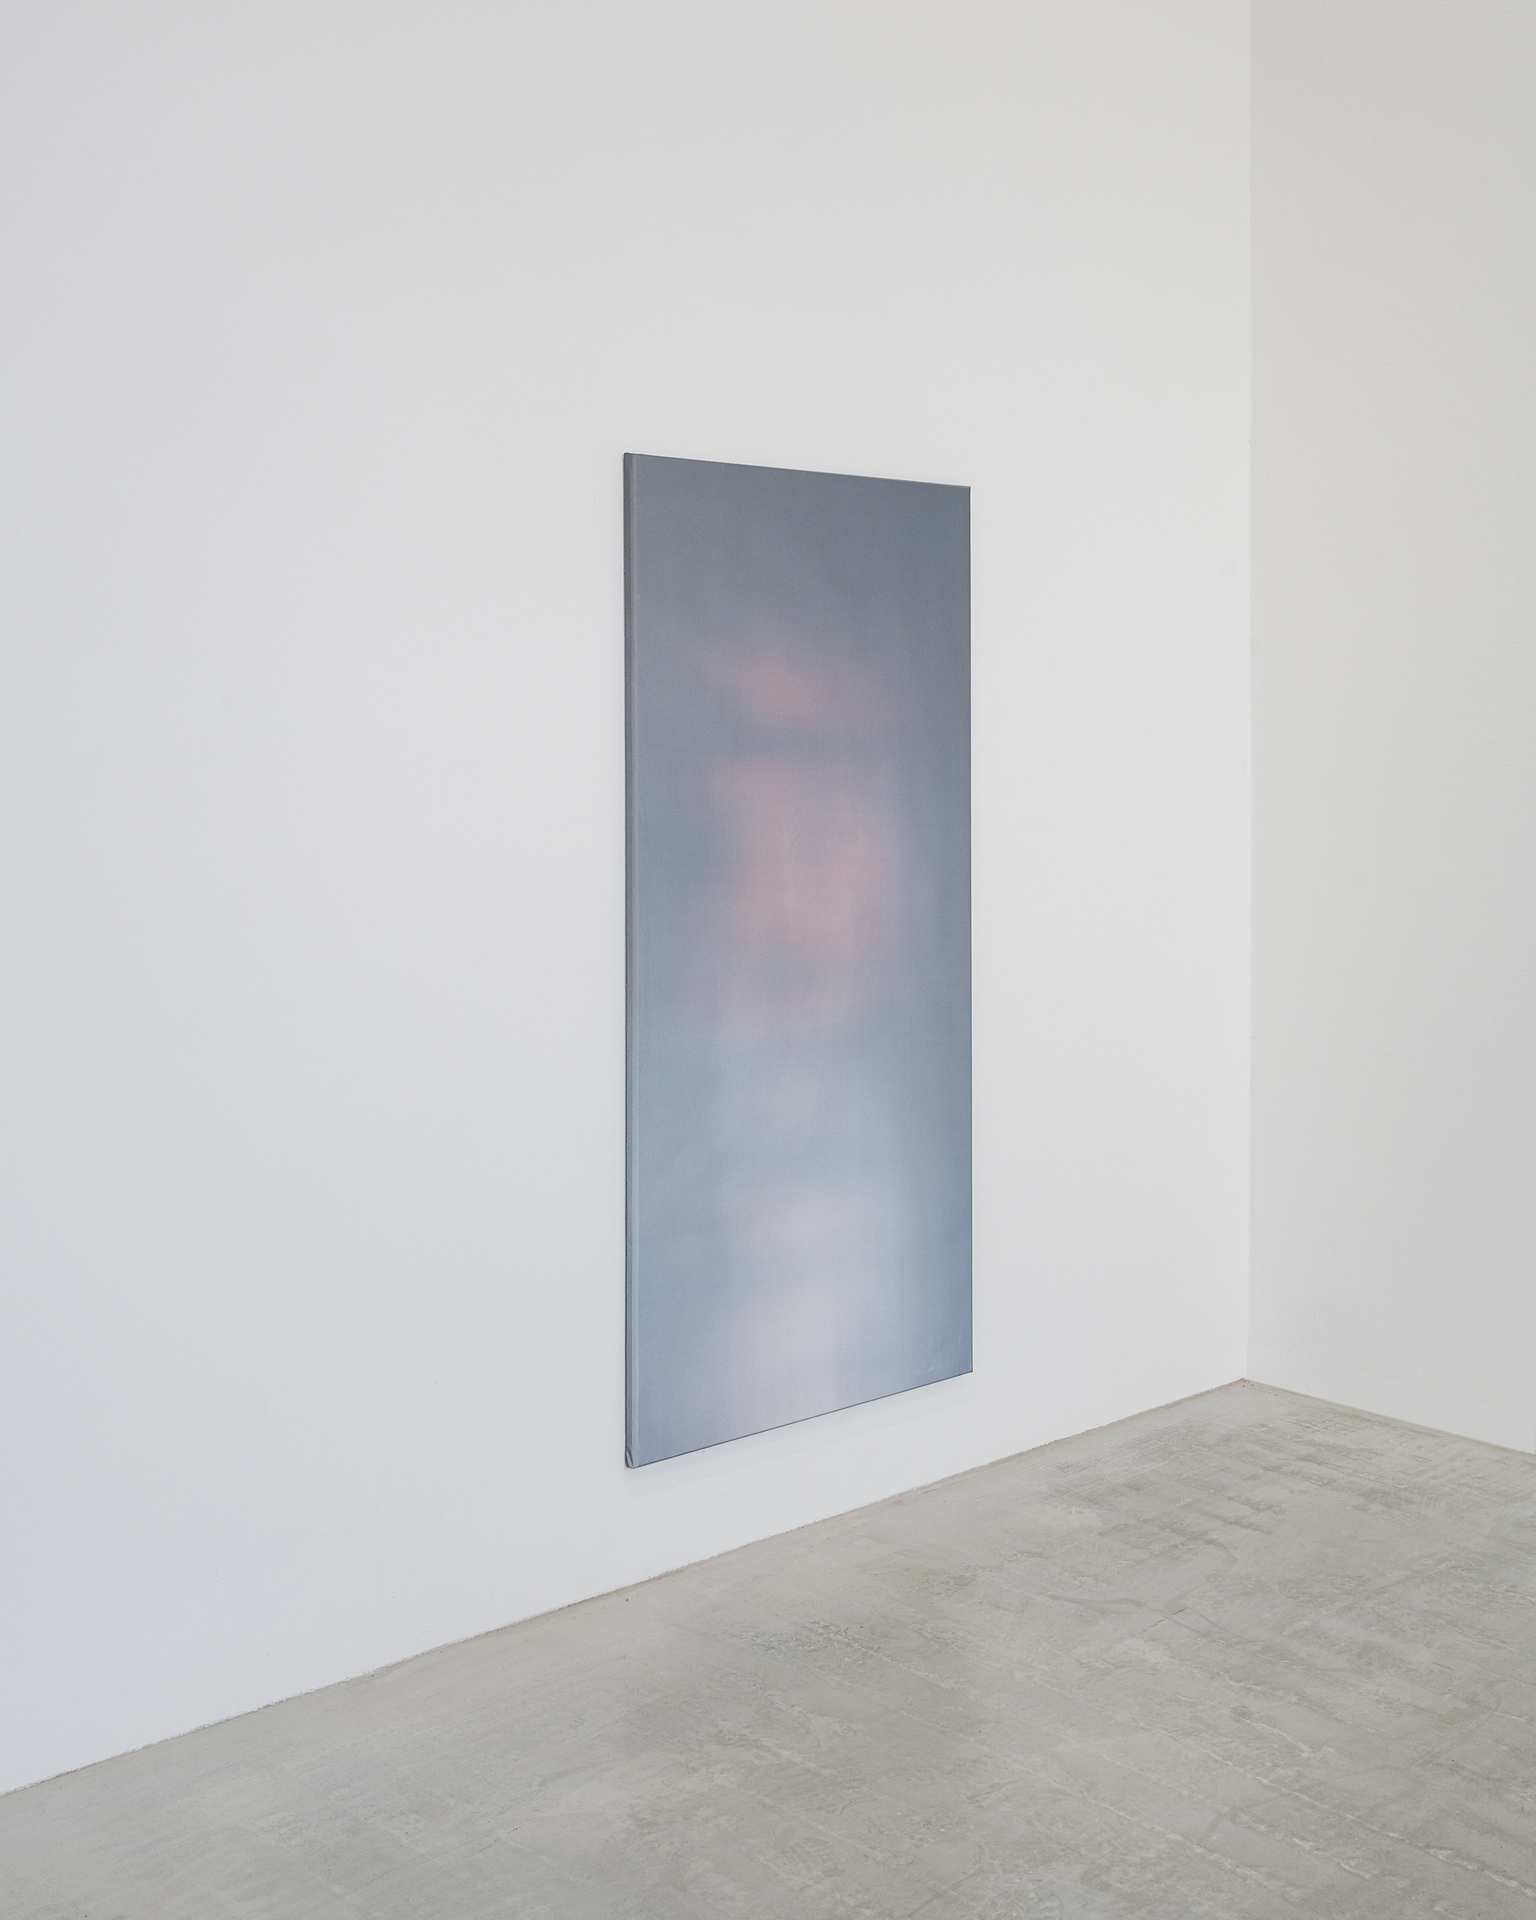 Eva Löfdahl, Untitled, 2022. 		New and vestigial traits, installation views at VEDA, Florence, 2022. 		Courtesy the artist and VEDA, Florence. Images: Flavio Pescatori.